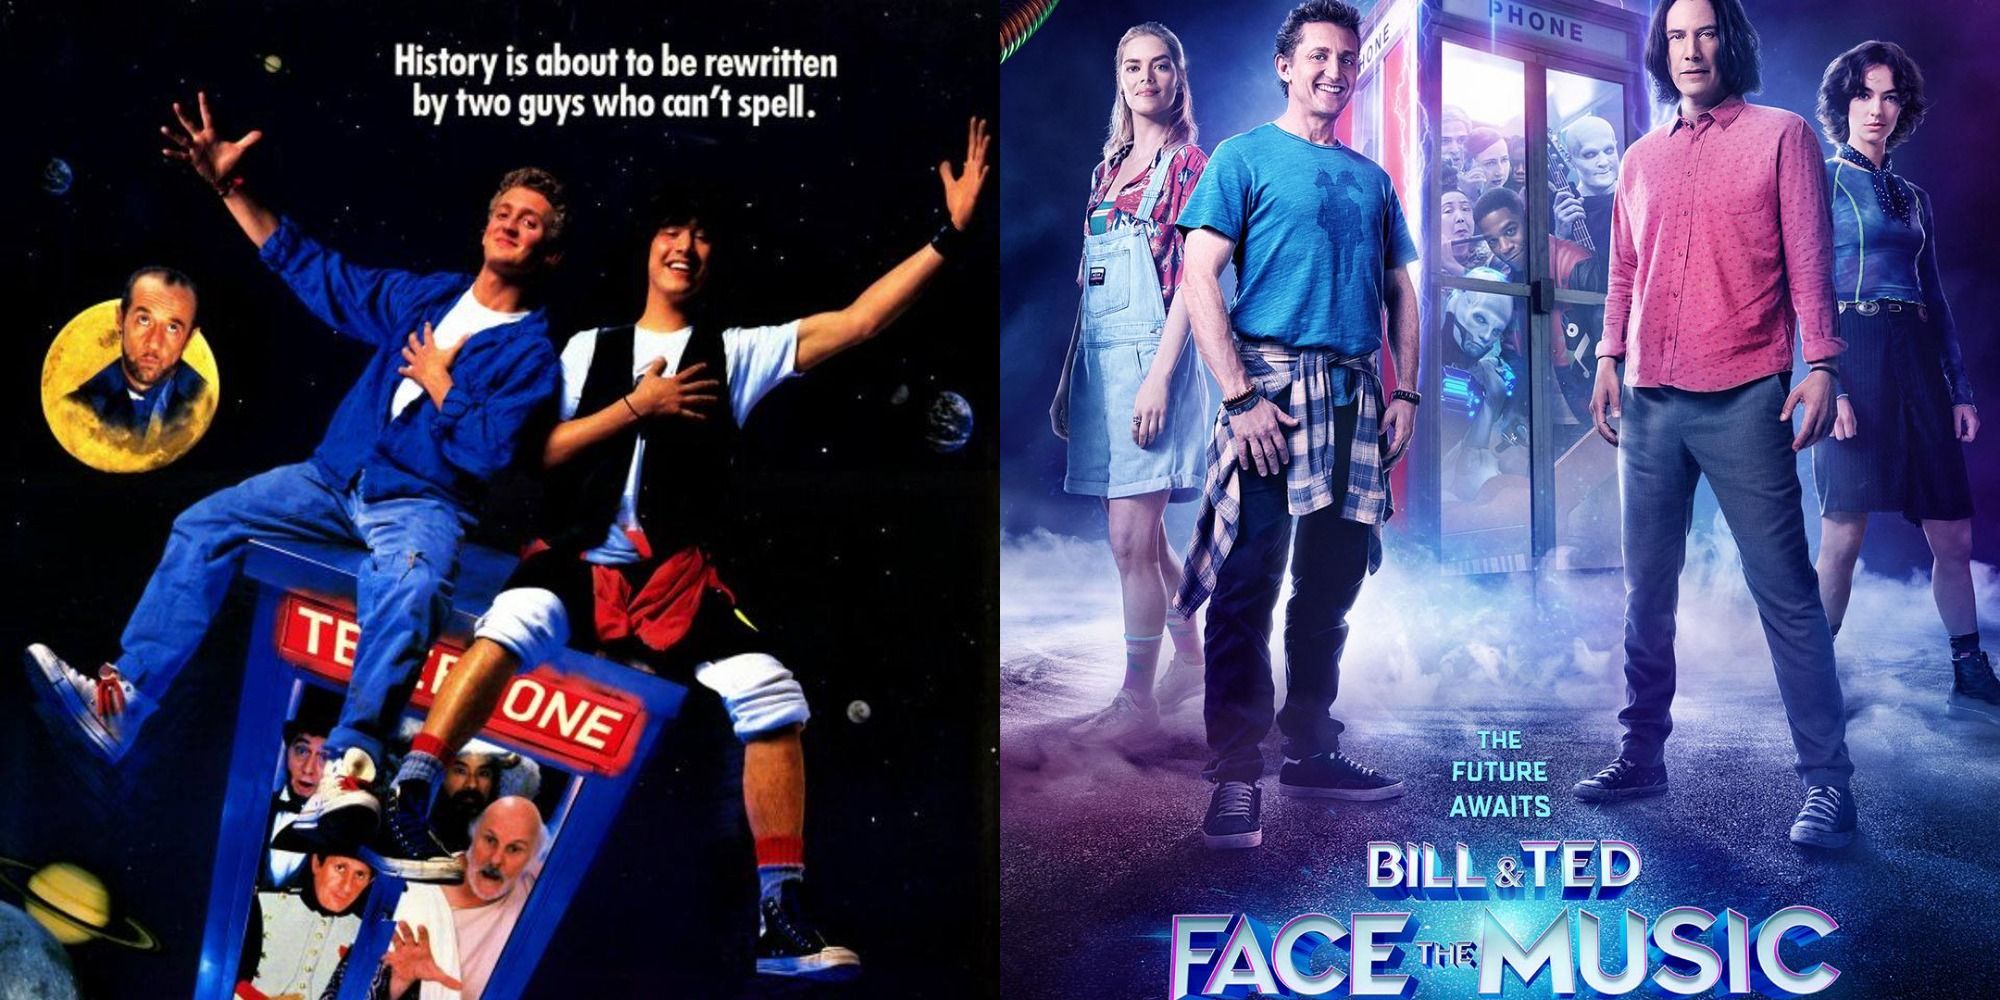 combined posters for Bill and Ted 1 and Face the Music featuring Keanu Reeves and Alex Winter